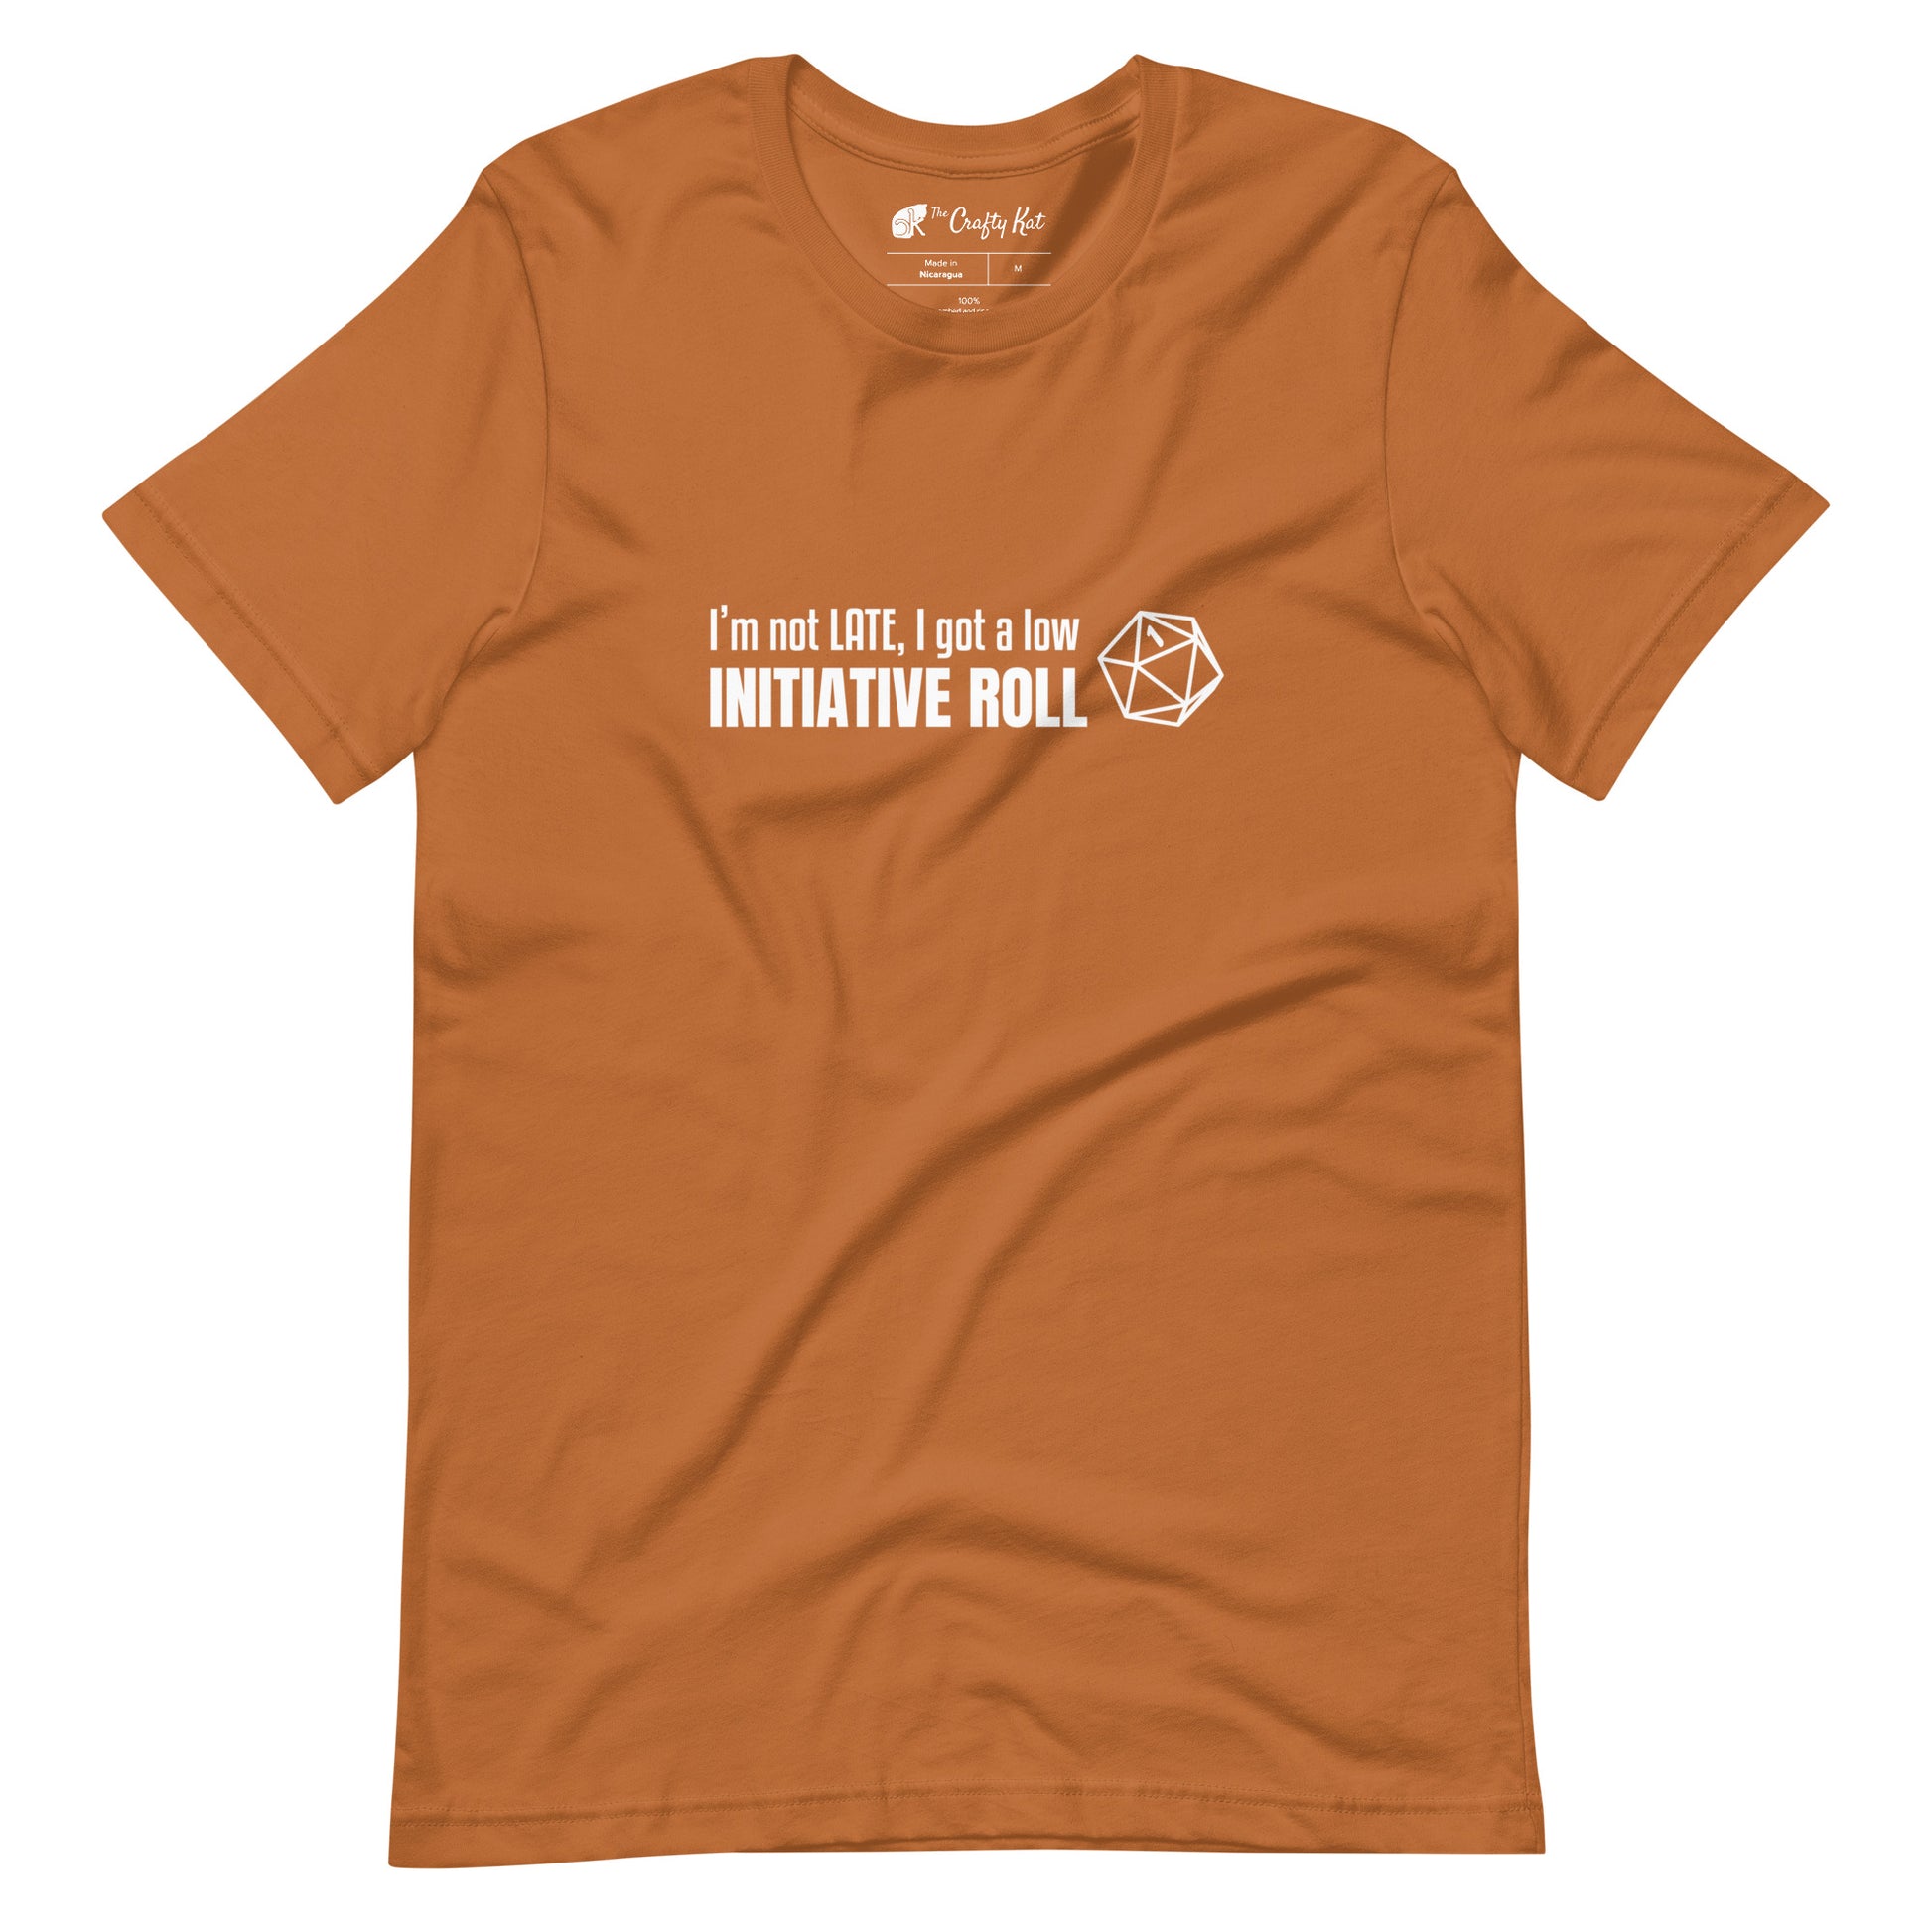 Toast (light orange) unisex t-shirt with a graphic of a d20 (twenty-sided die) showing a roll of "1" and text: "I'm not LATE, I got a low INITIATIVE ROLL"